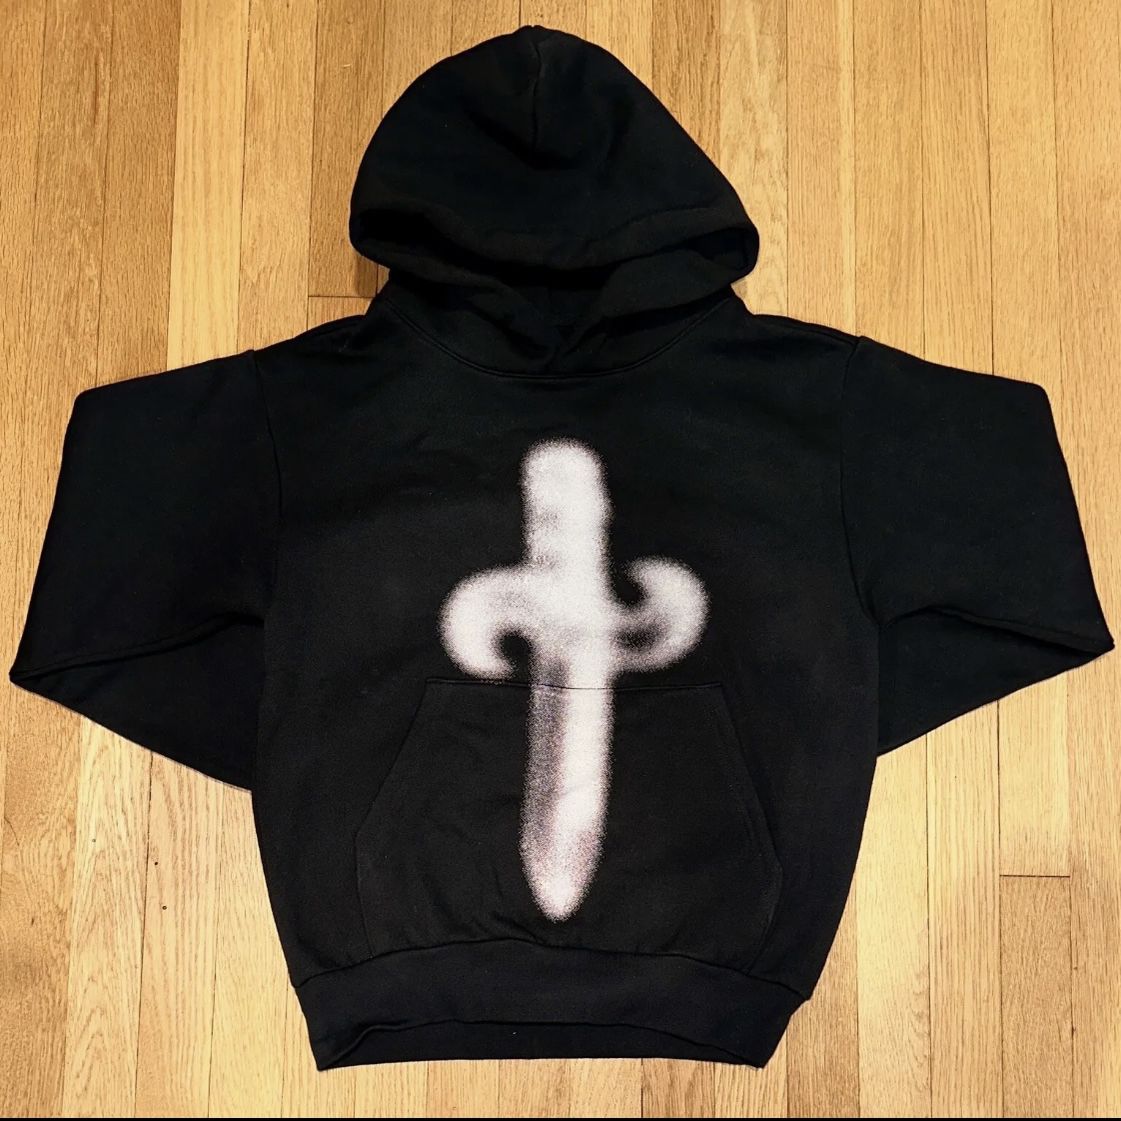 Drake 21 Savage It's All A Blur Your Hoodie Medium for Sale in Los